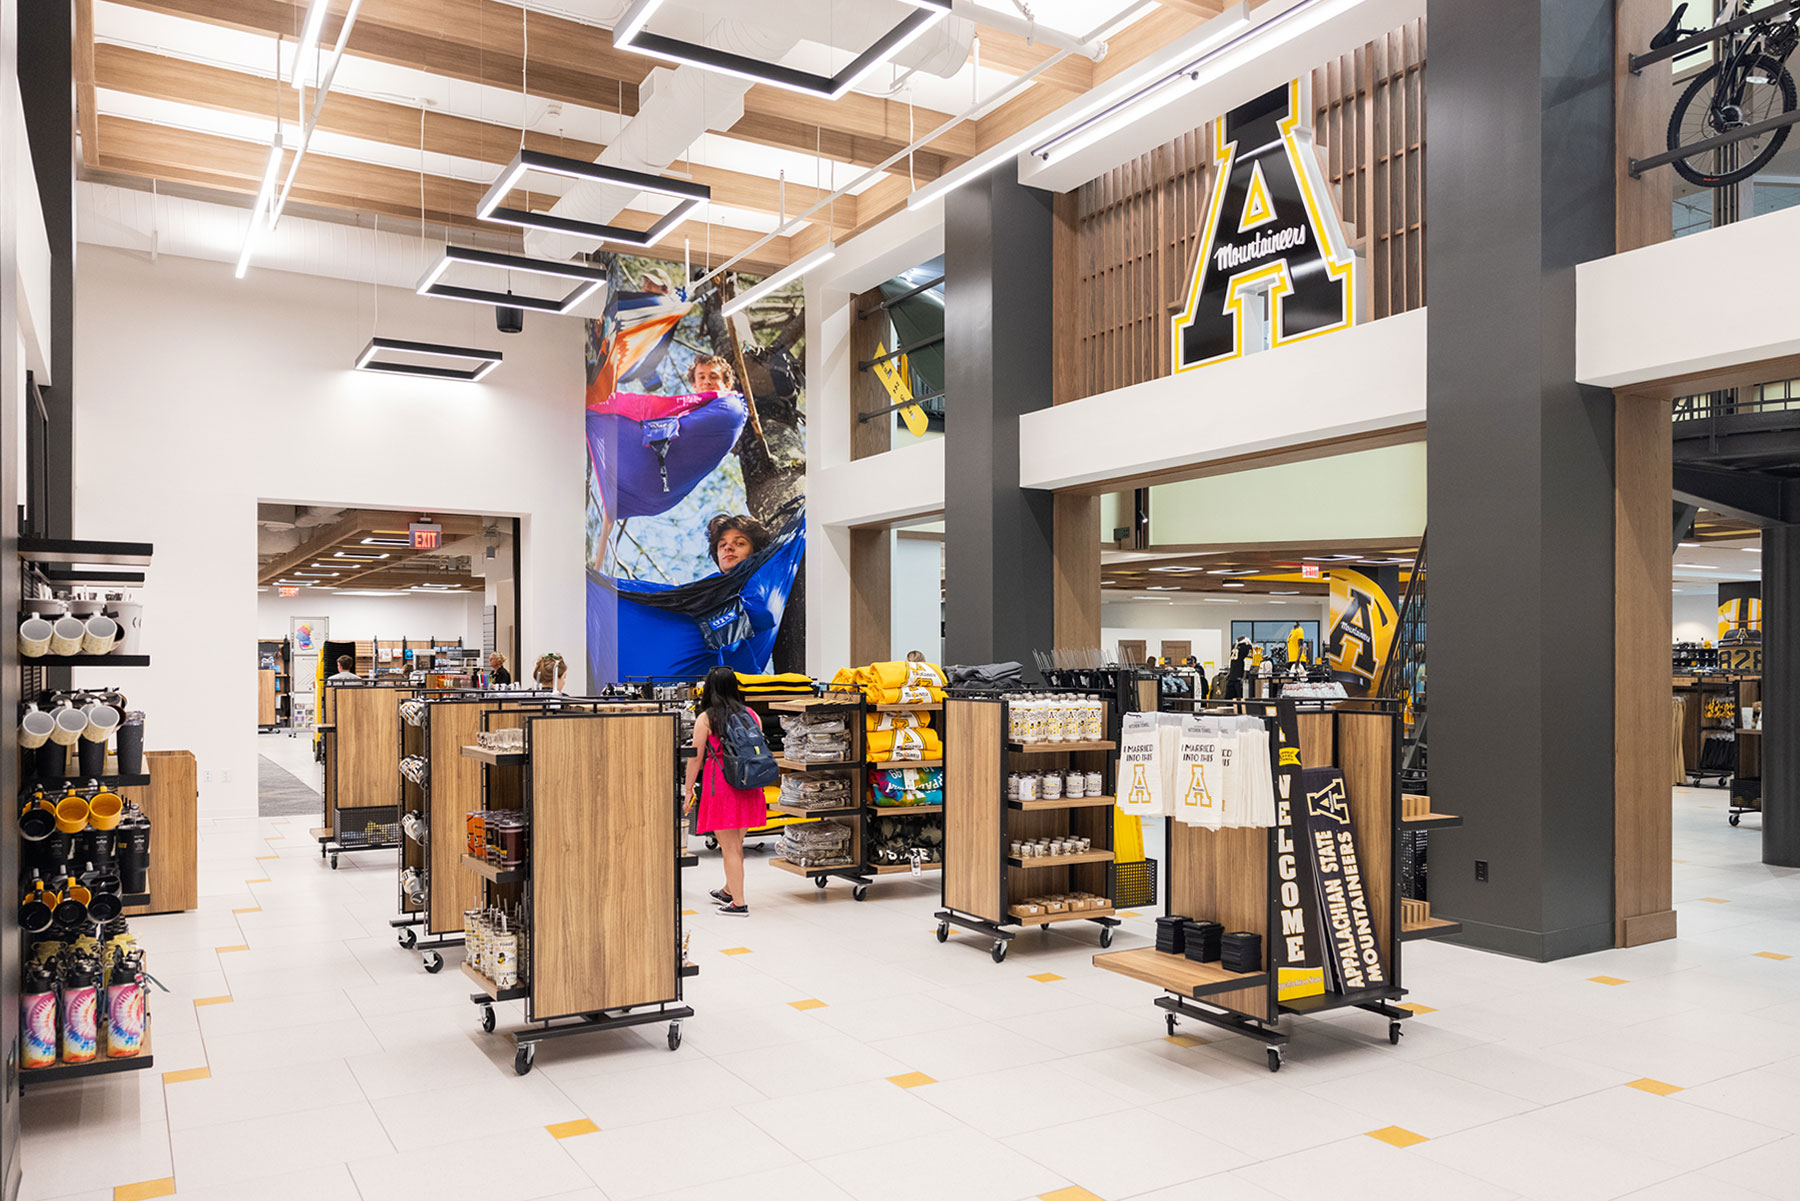 Campus Store Grand Reopening, August 2023